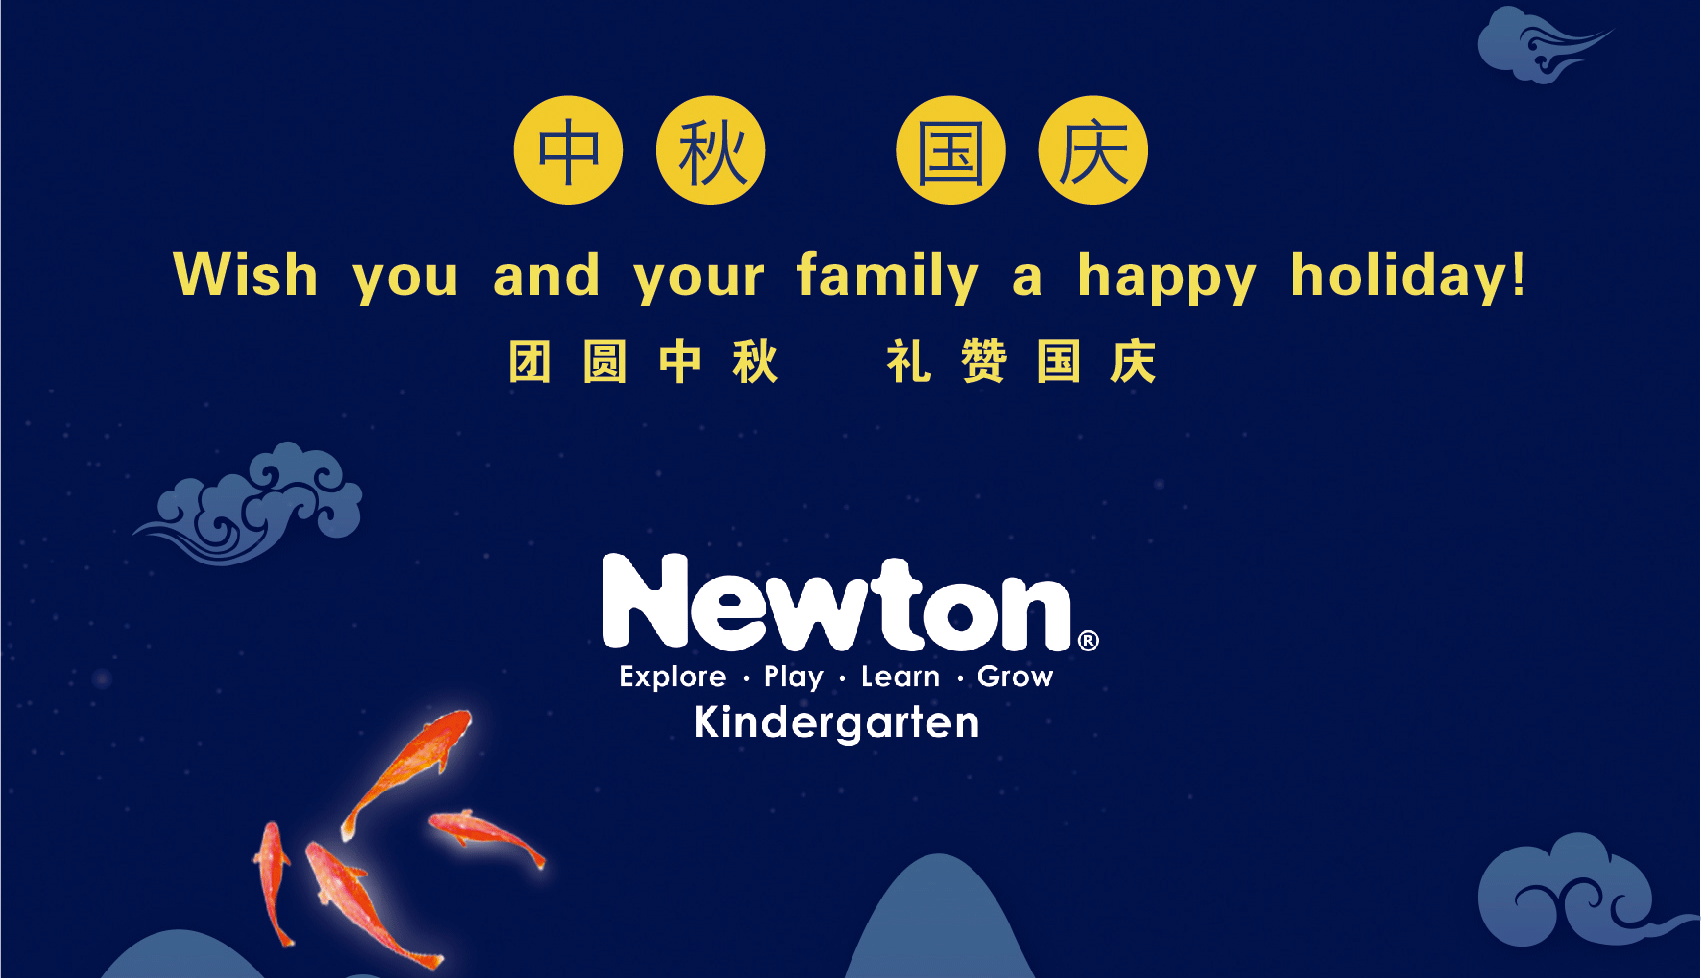 Celebration of Mid-autumn Festival and National Day | Newton Educational Group Holiday Reminder